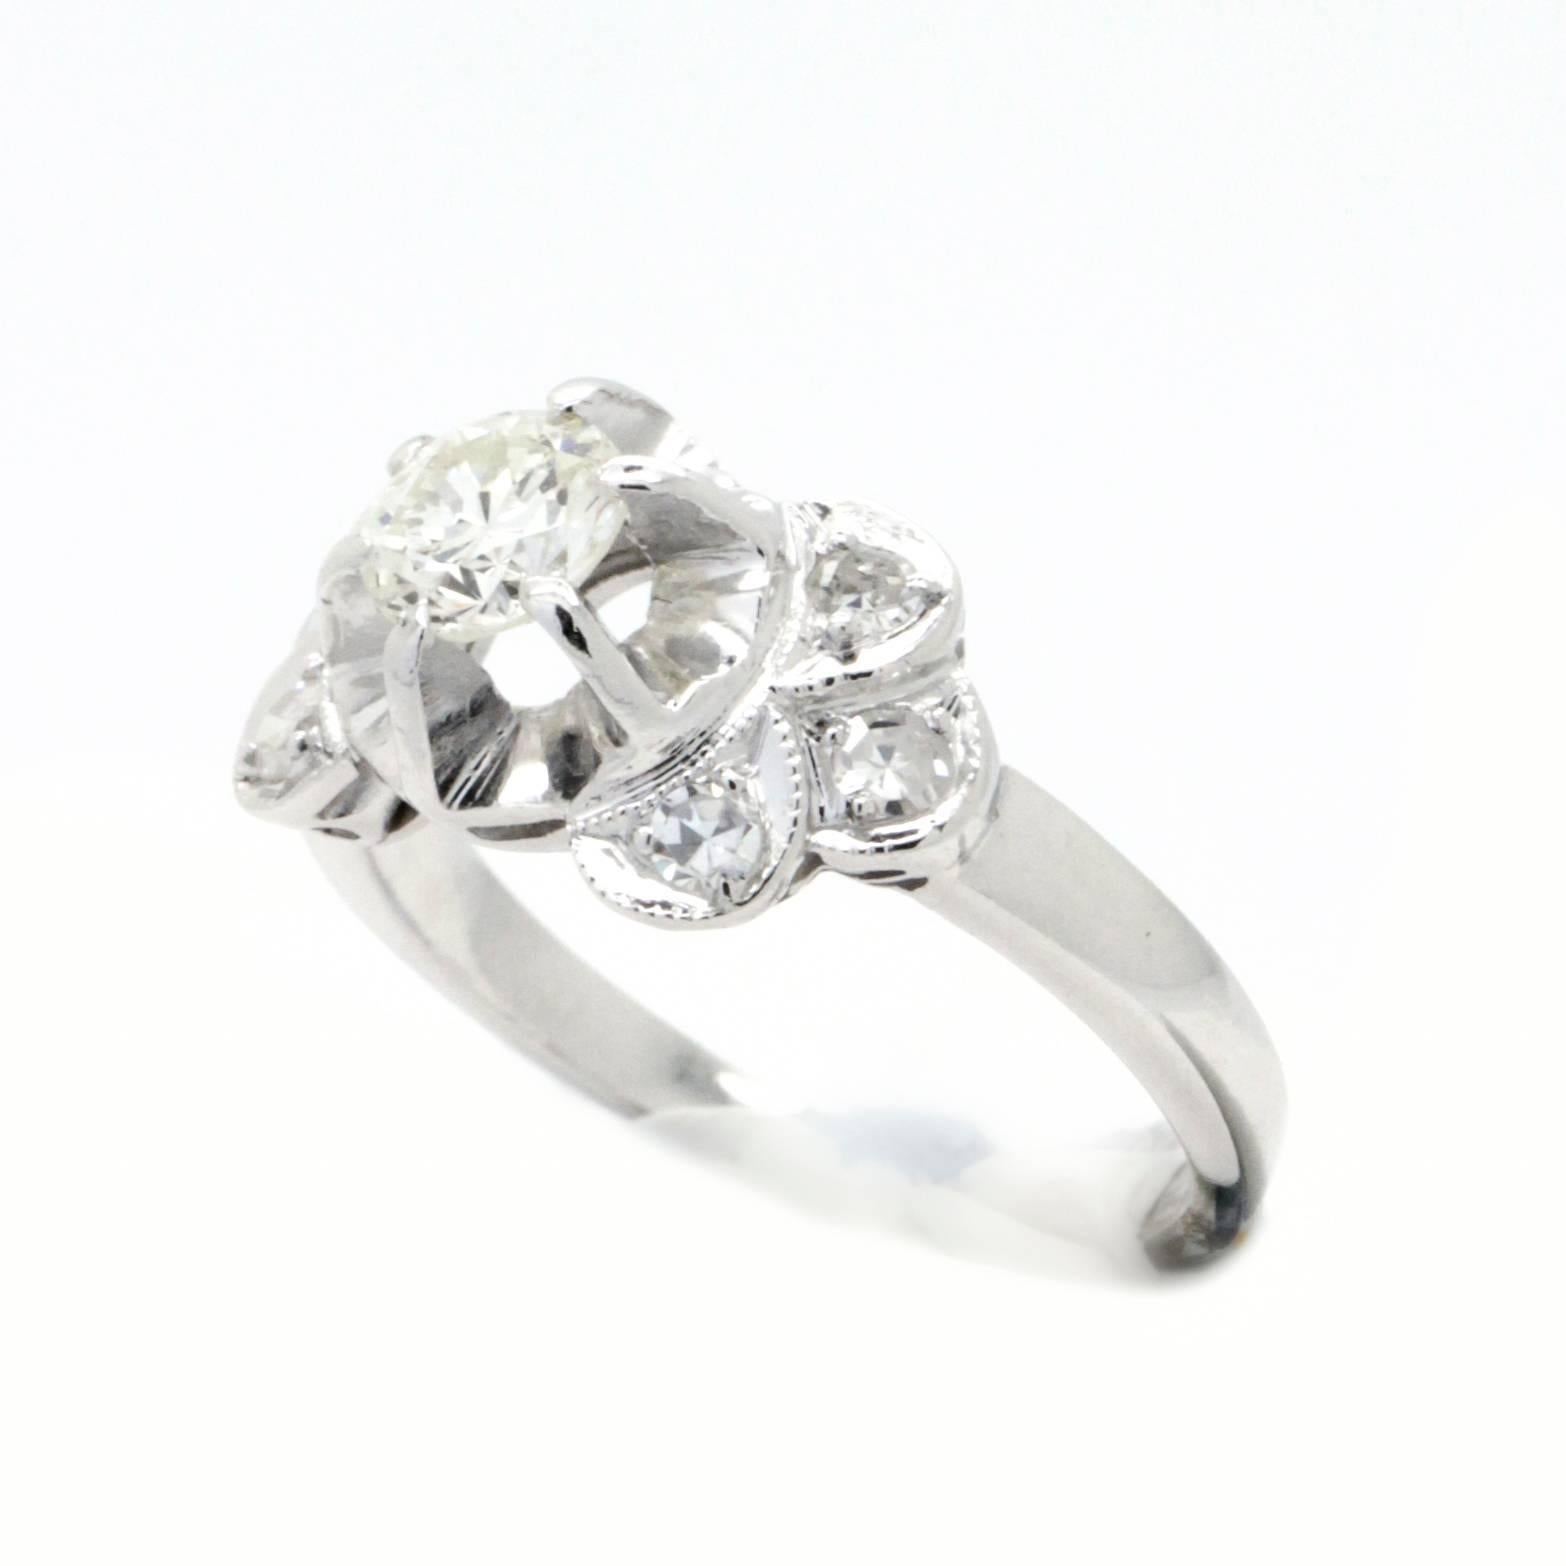 Art Deco Diamond Engagement Ring, Handmade Antique 1940s Ring In Excellent Condition For Sale In Sydney CBD, AU